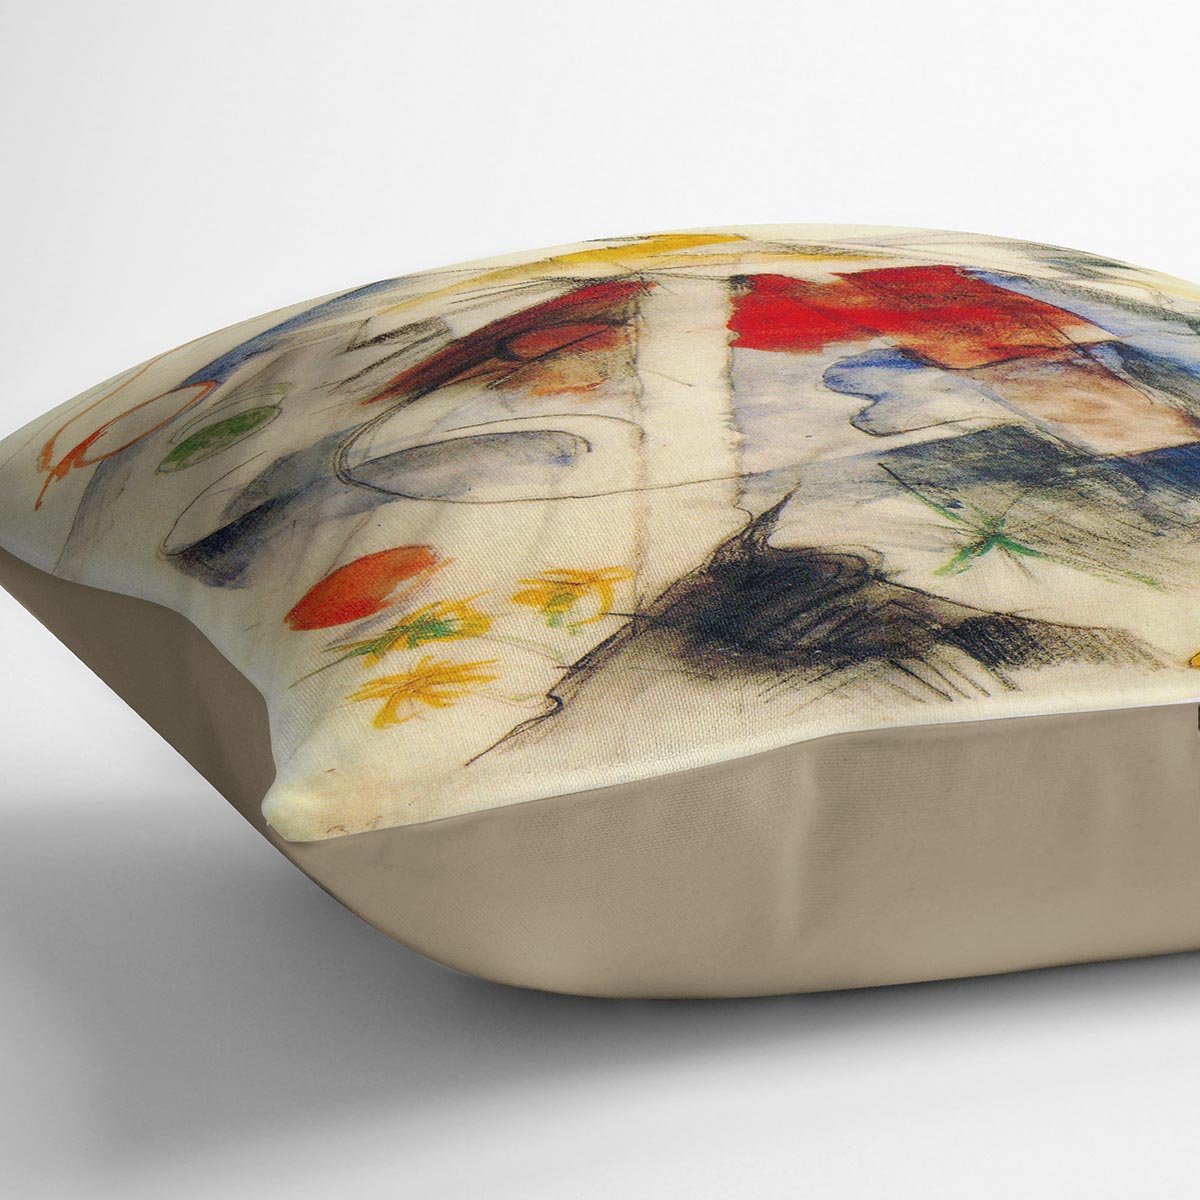 Sketch of the Brenner road 1 by Franz Marc Throw Pillow